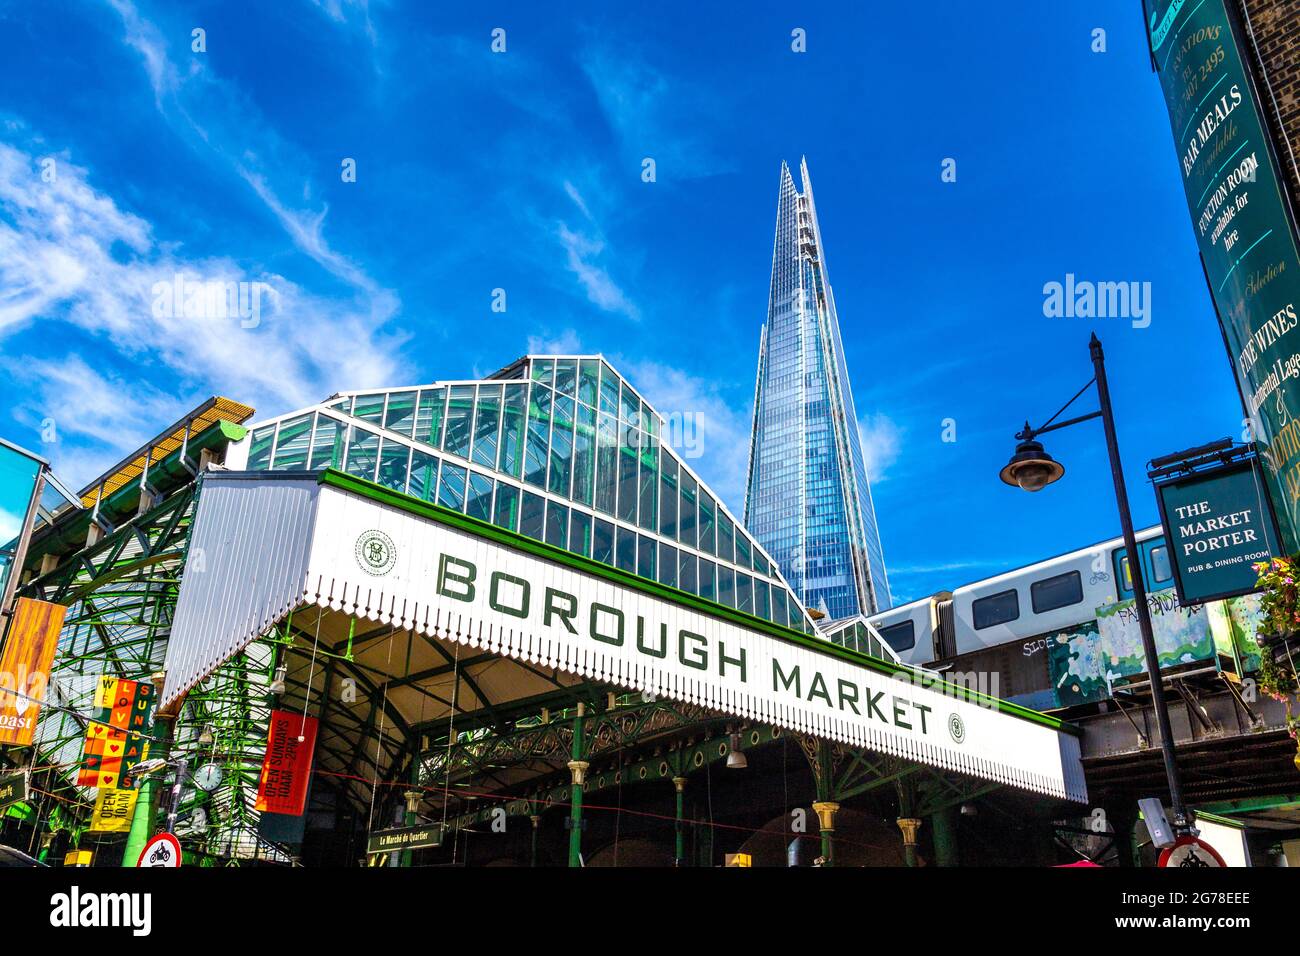 Roof of Borough Market with the Shard in the background, London, UK Stock Photo